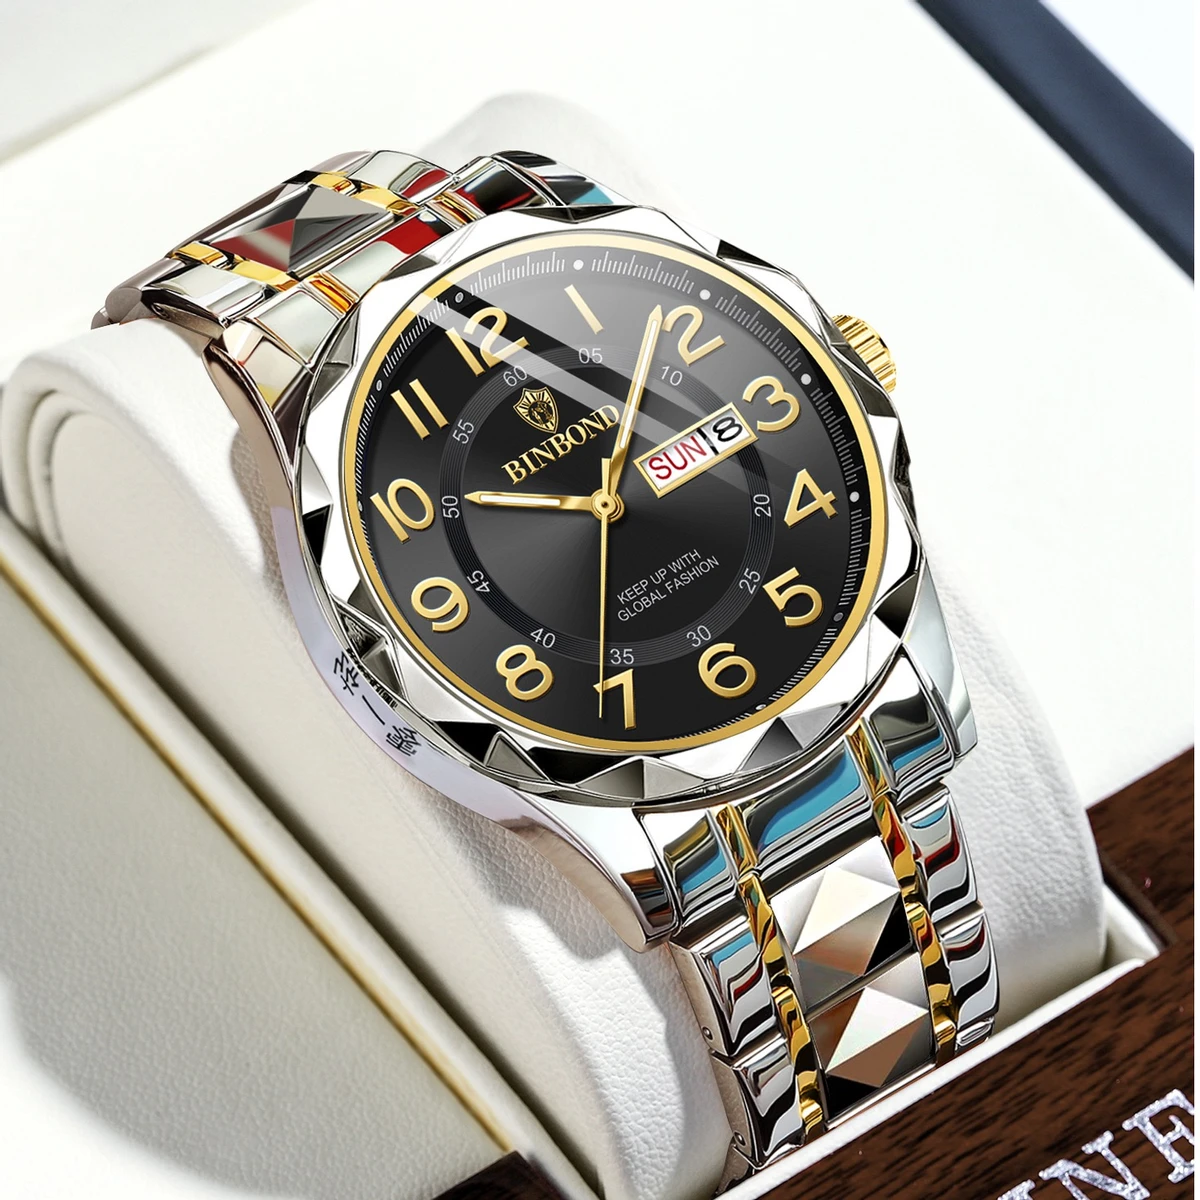 Luxury Binbond Dimon card Digain Stainless Steel Classic Waterproof Watch BINBOND MODEL 5663 CHAIN  TOTON AR DIAL BLACK  COOLER WATCH FOR MAN